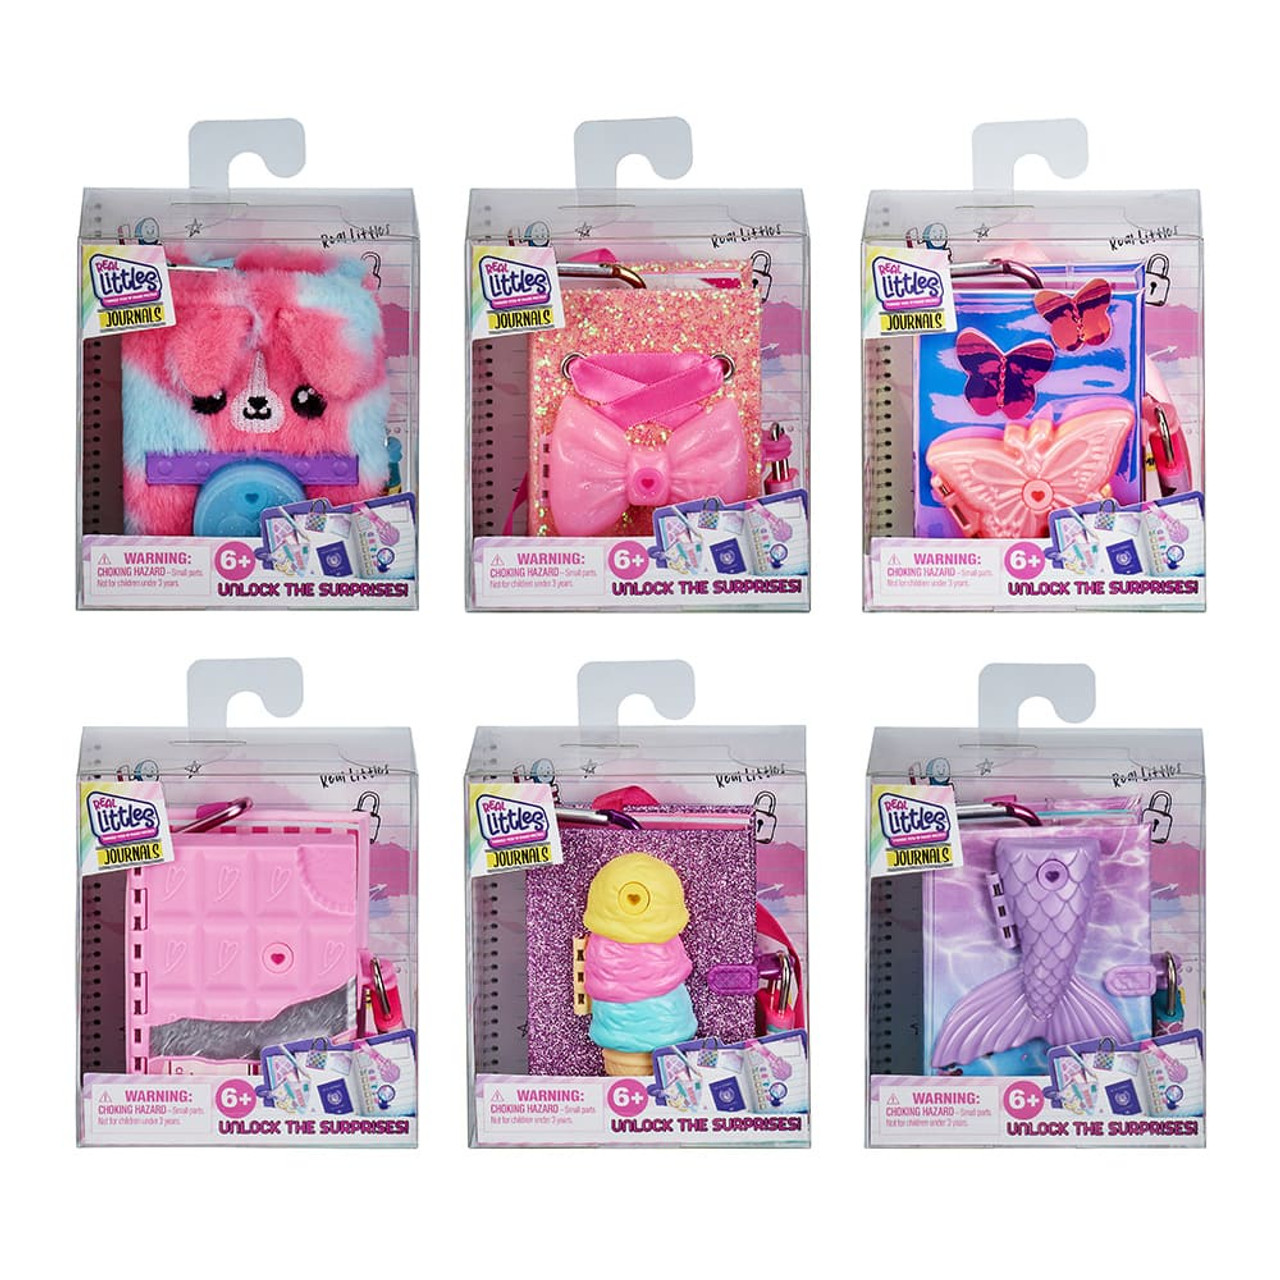 REAL LITTLES S5 JOURNAL PACK - Toys Club